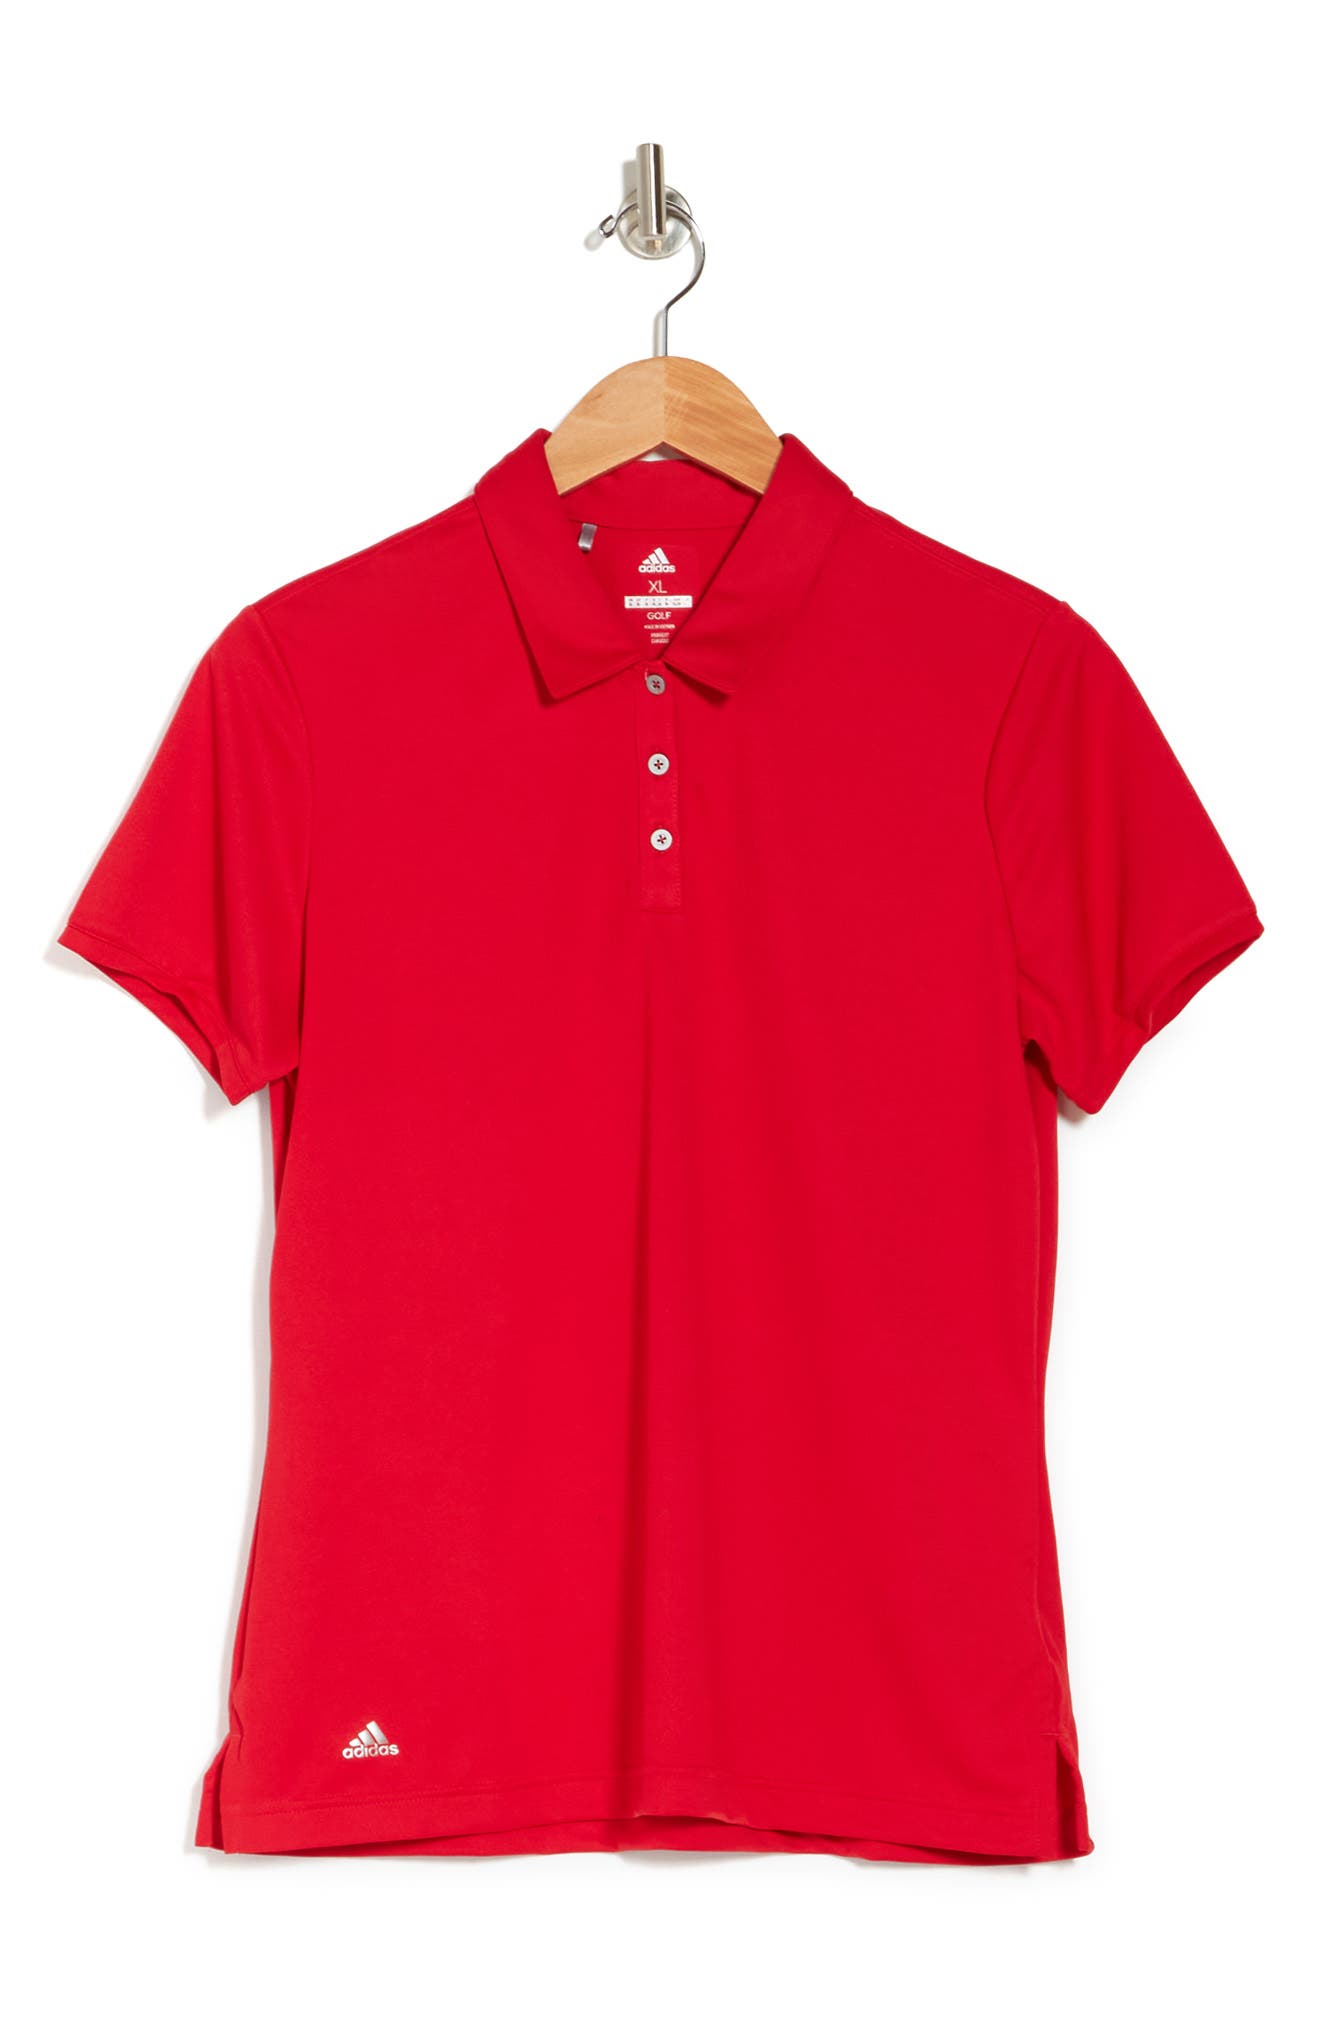 Adidas Golf Performance Short Sleeve Polo In Collegiate Red